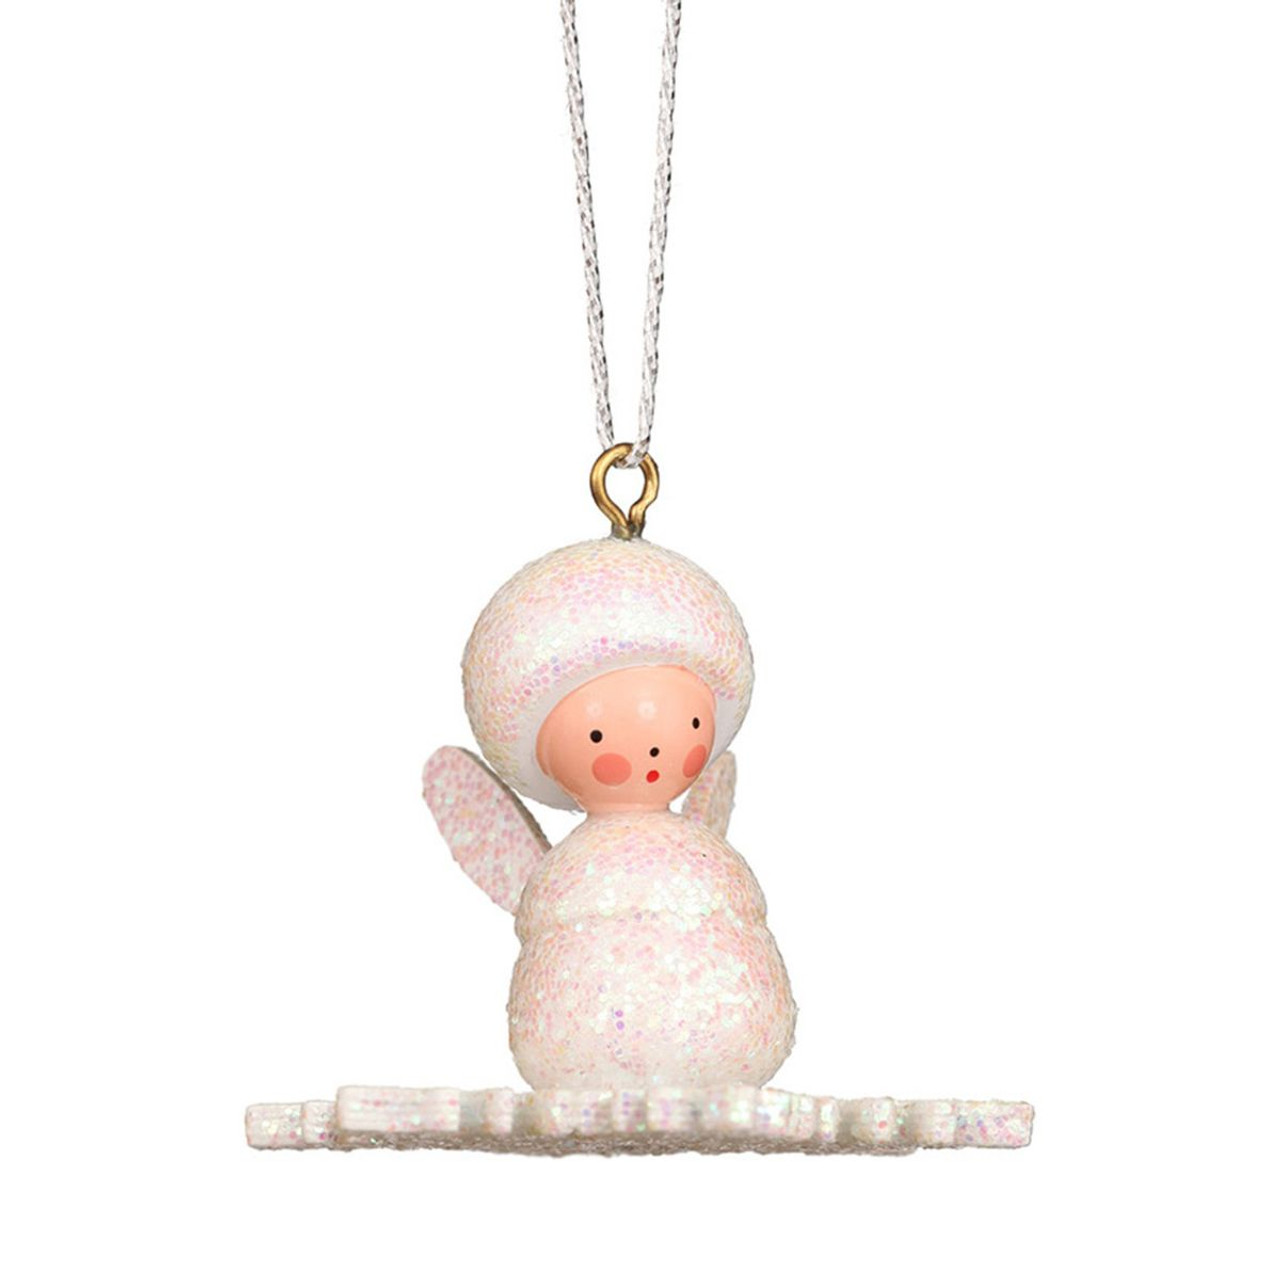 Angel Ornament ~ Holiday Decorations ~ Pink Tinsel, Beads, Jewel ~ 8 Inch